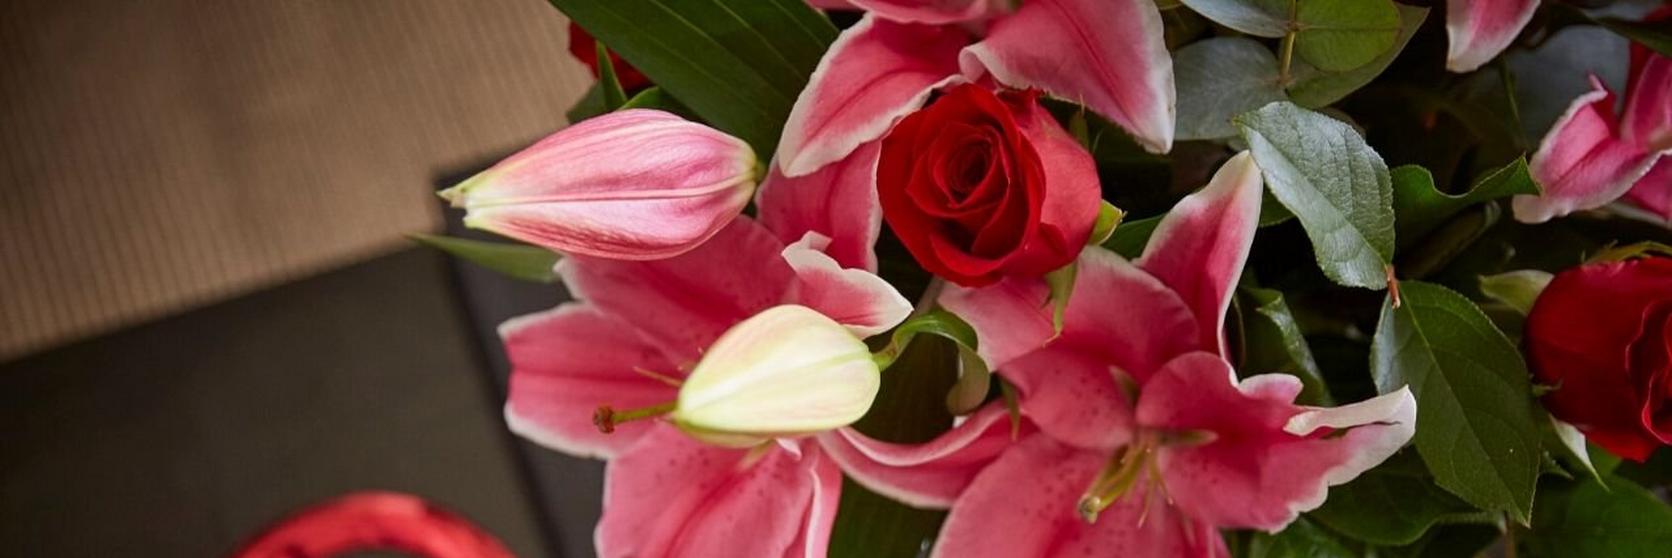 lilies-rose-pink-red-on-table